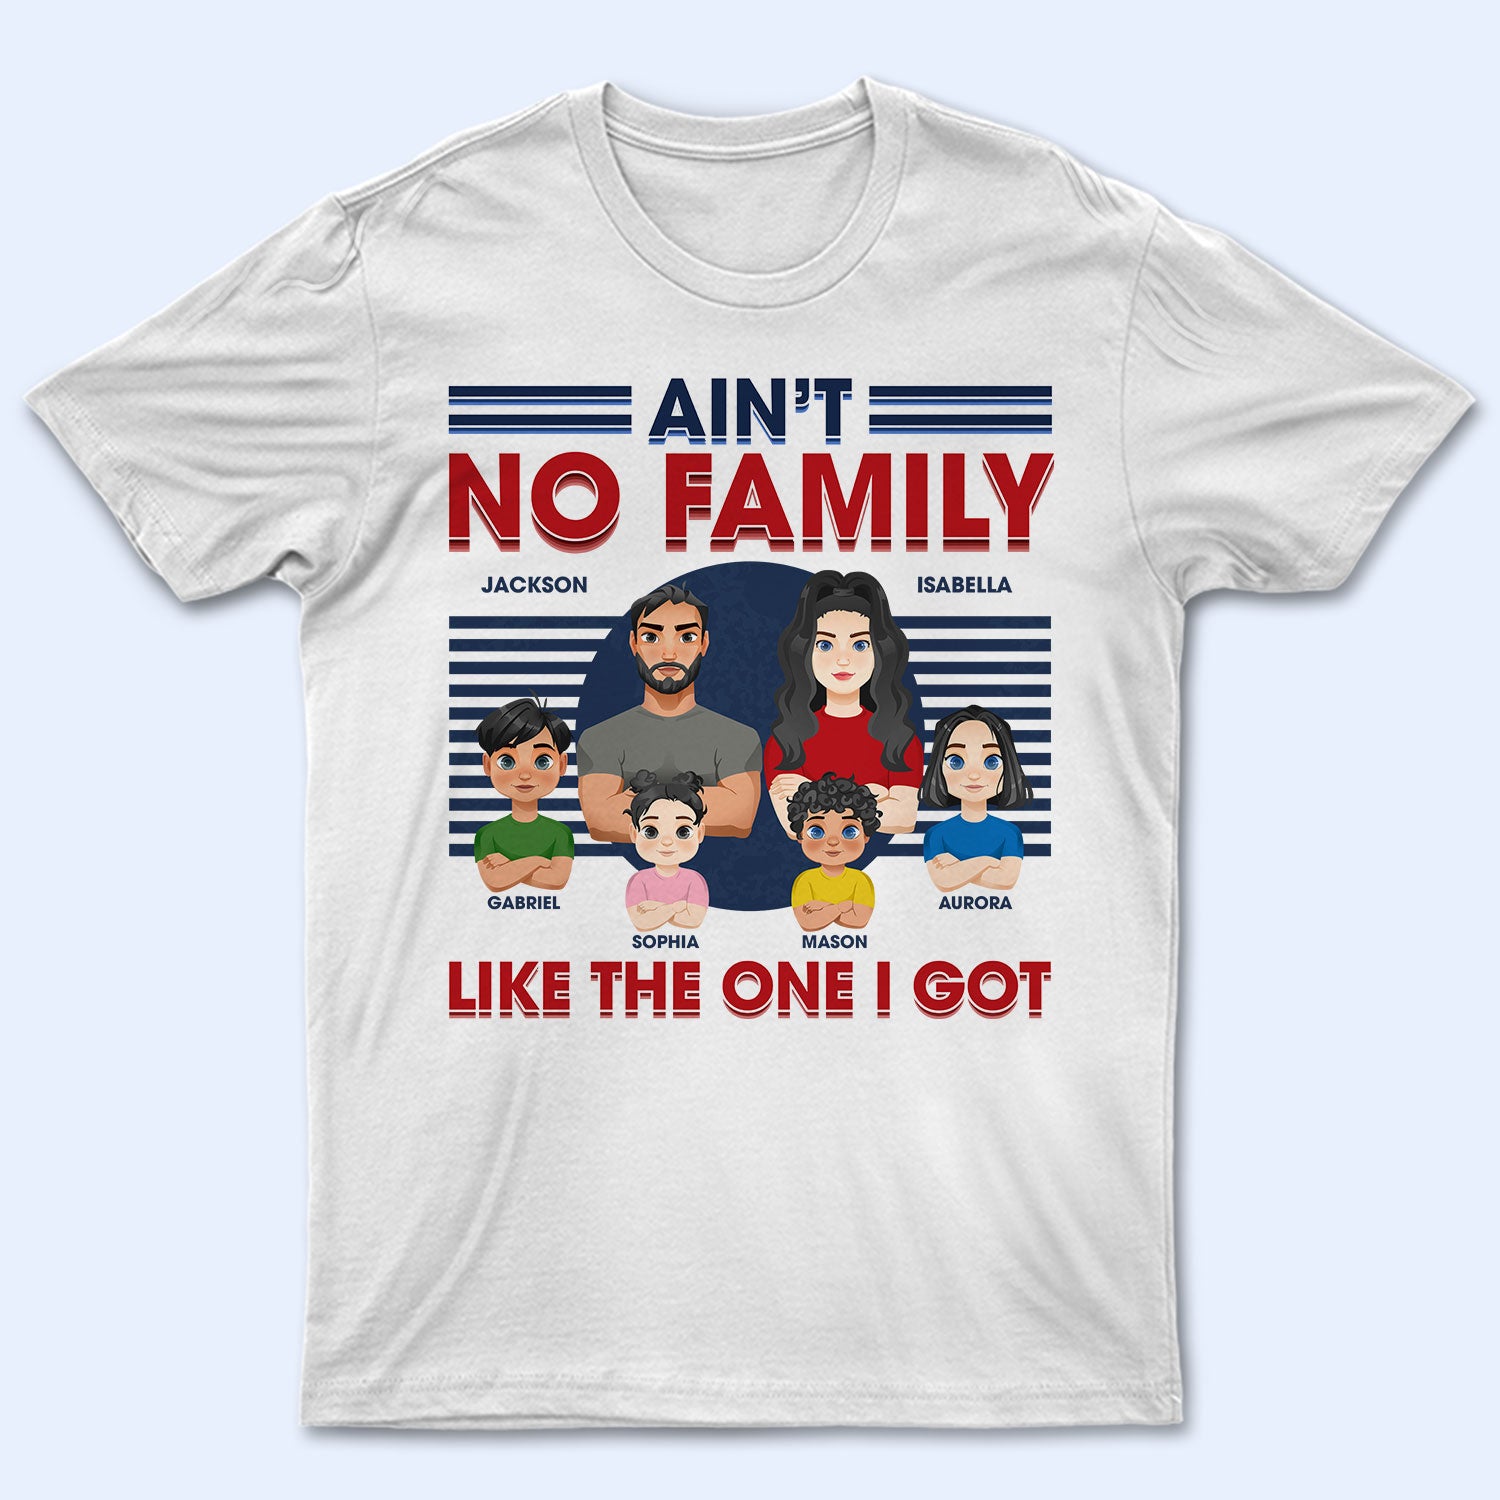 Ain't No Family Like The One I Got - Birthday, Loving Gift For Husband, Wife, Couples, Dad, Mom - Personalized Custom T Shirt